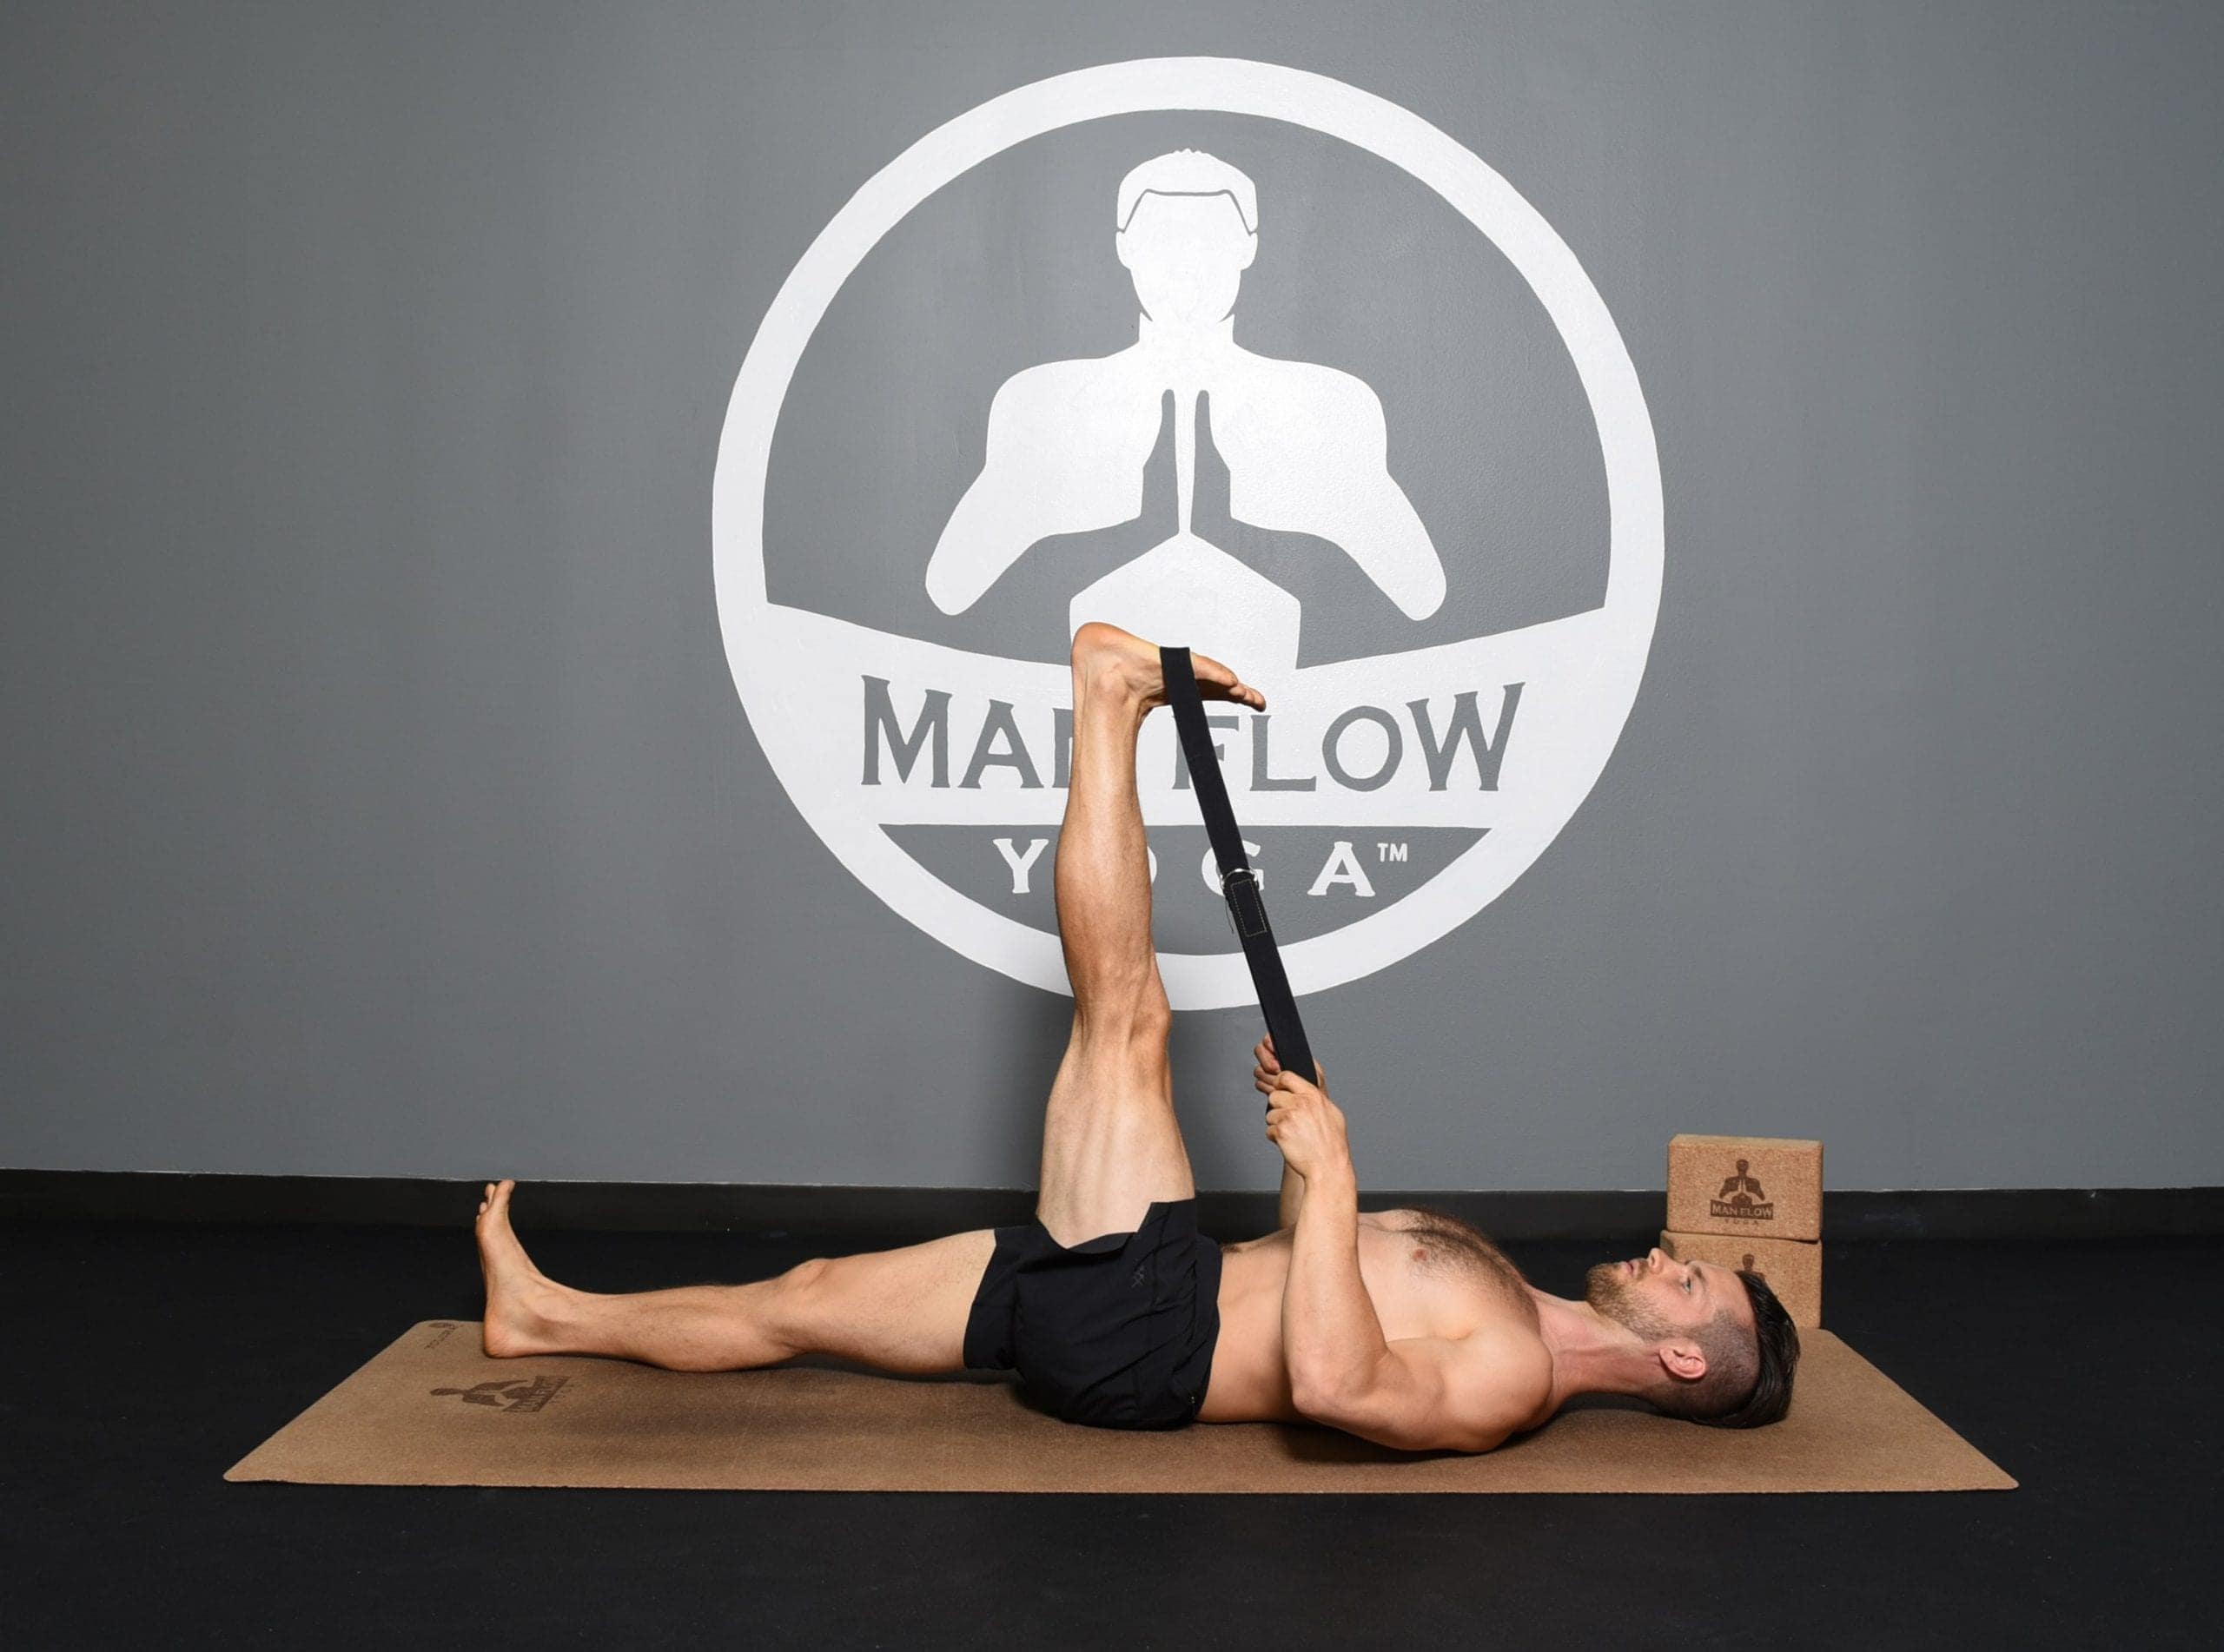 Yoga Poses For Back Pain Relief Causes And Fixes Man Flow Yoga